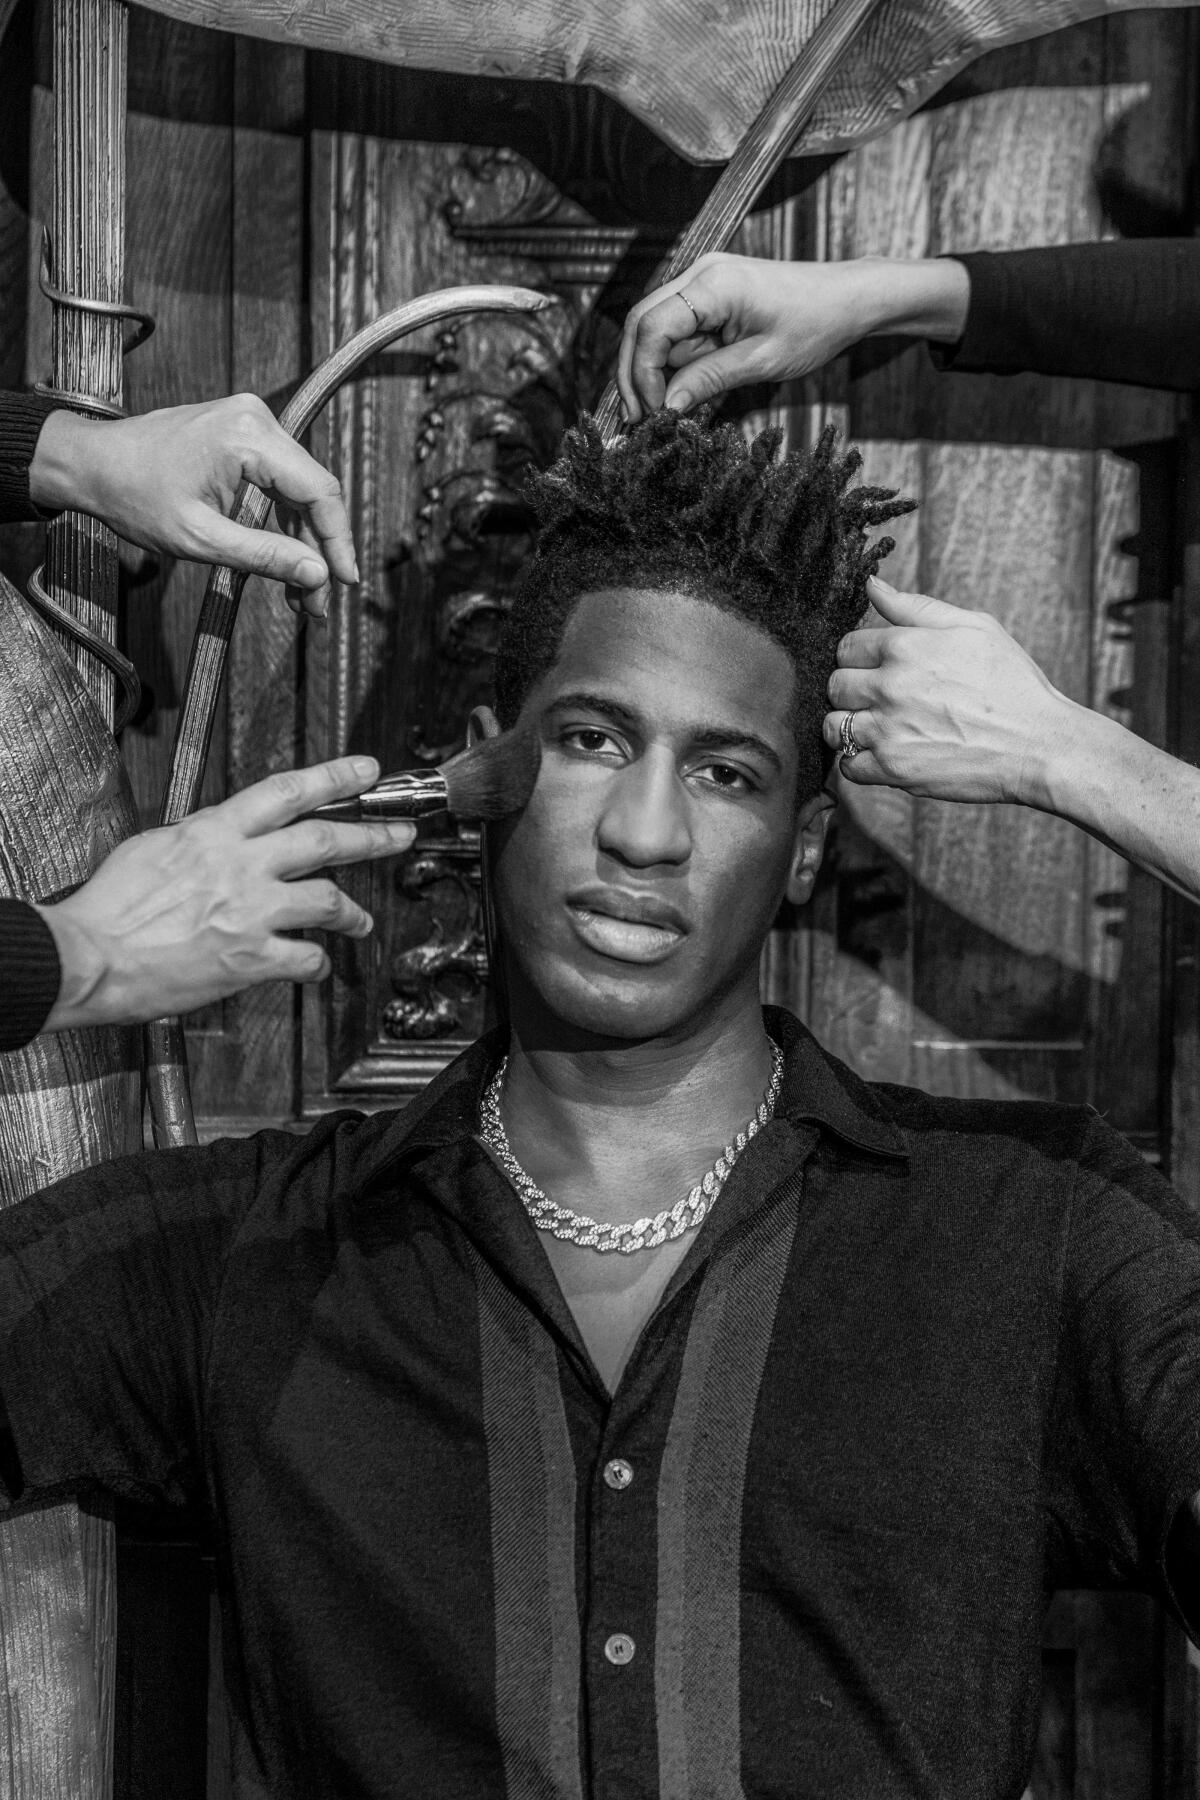  Jon Batiste, with hands around his head grooming his hair and face